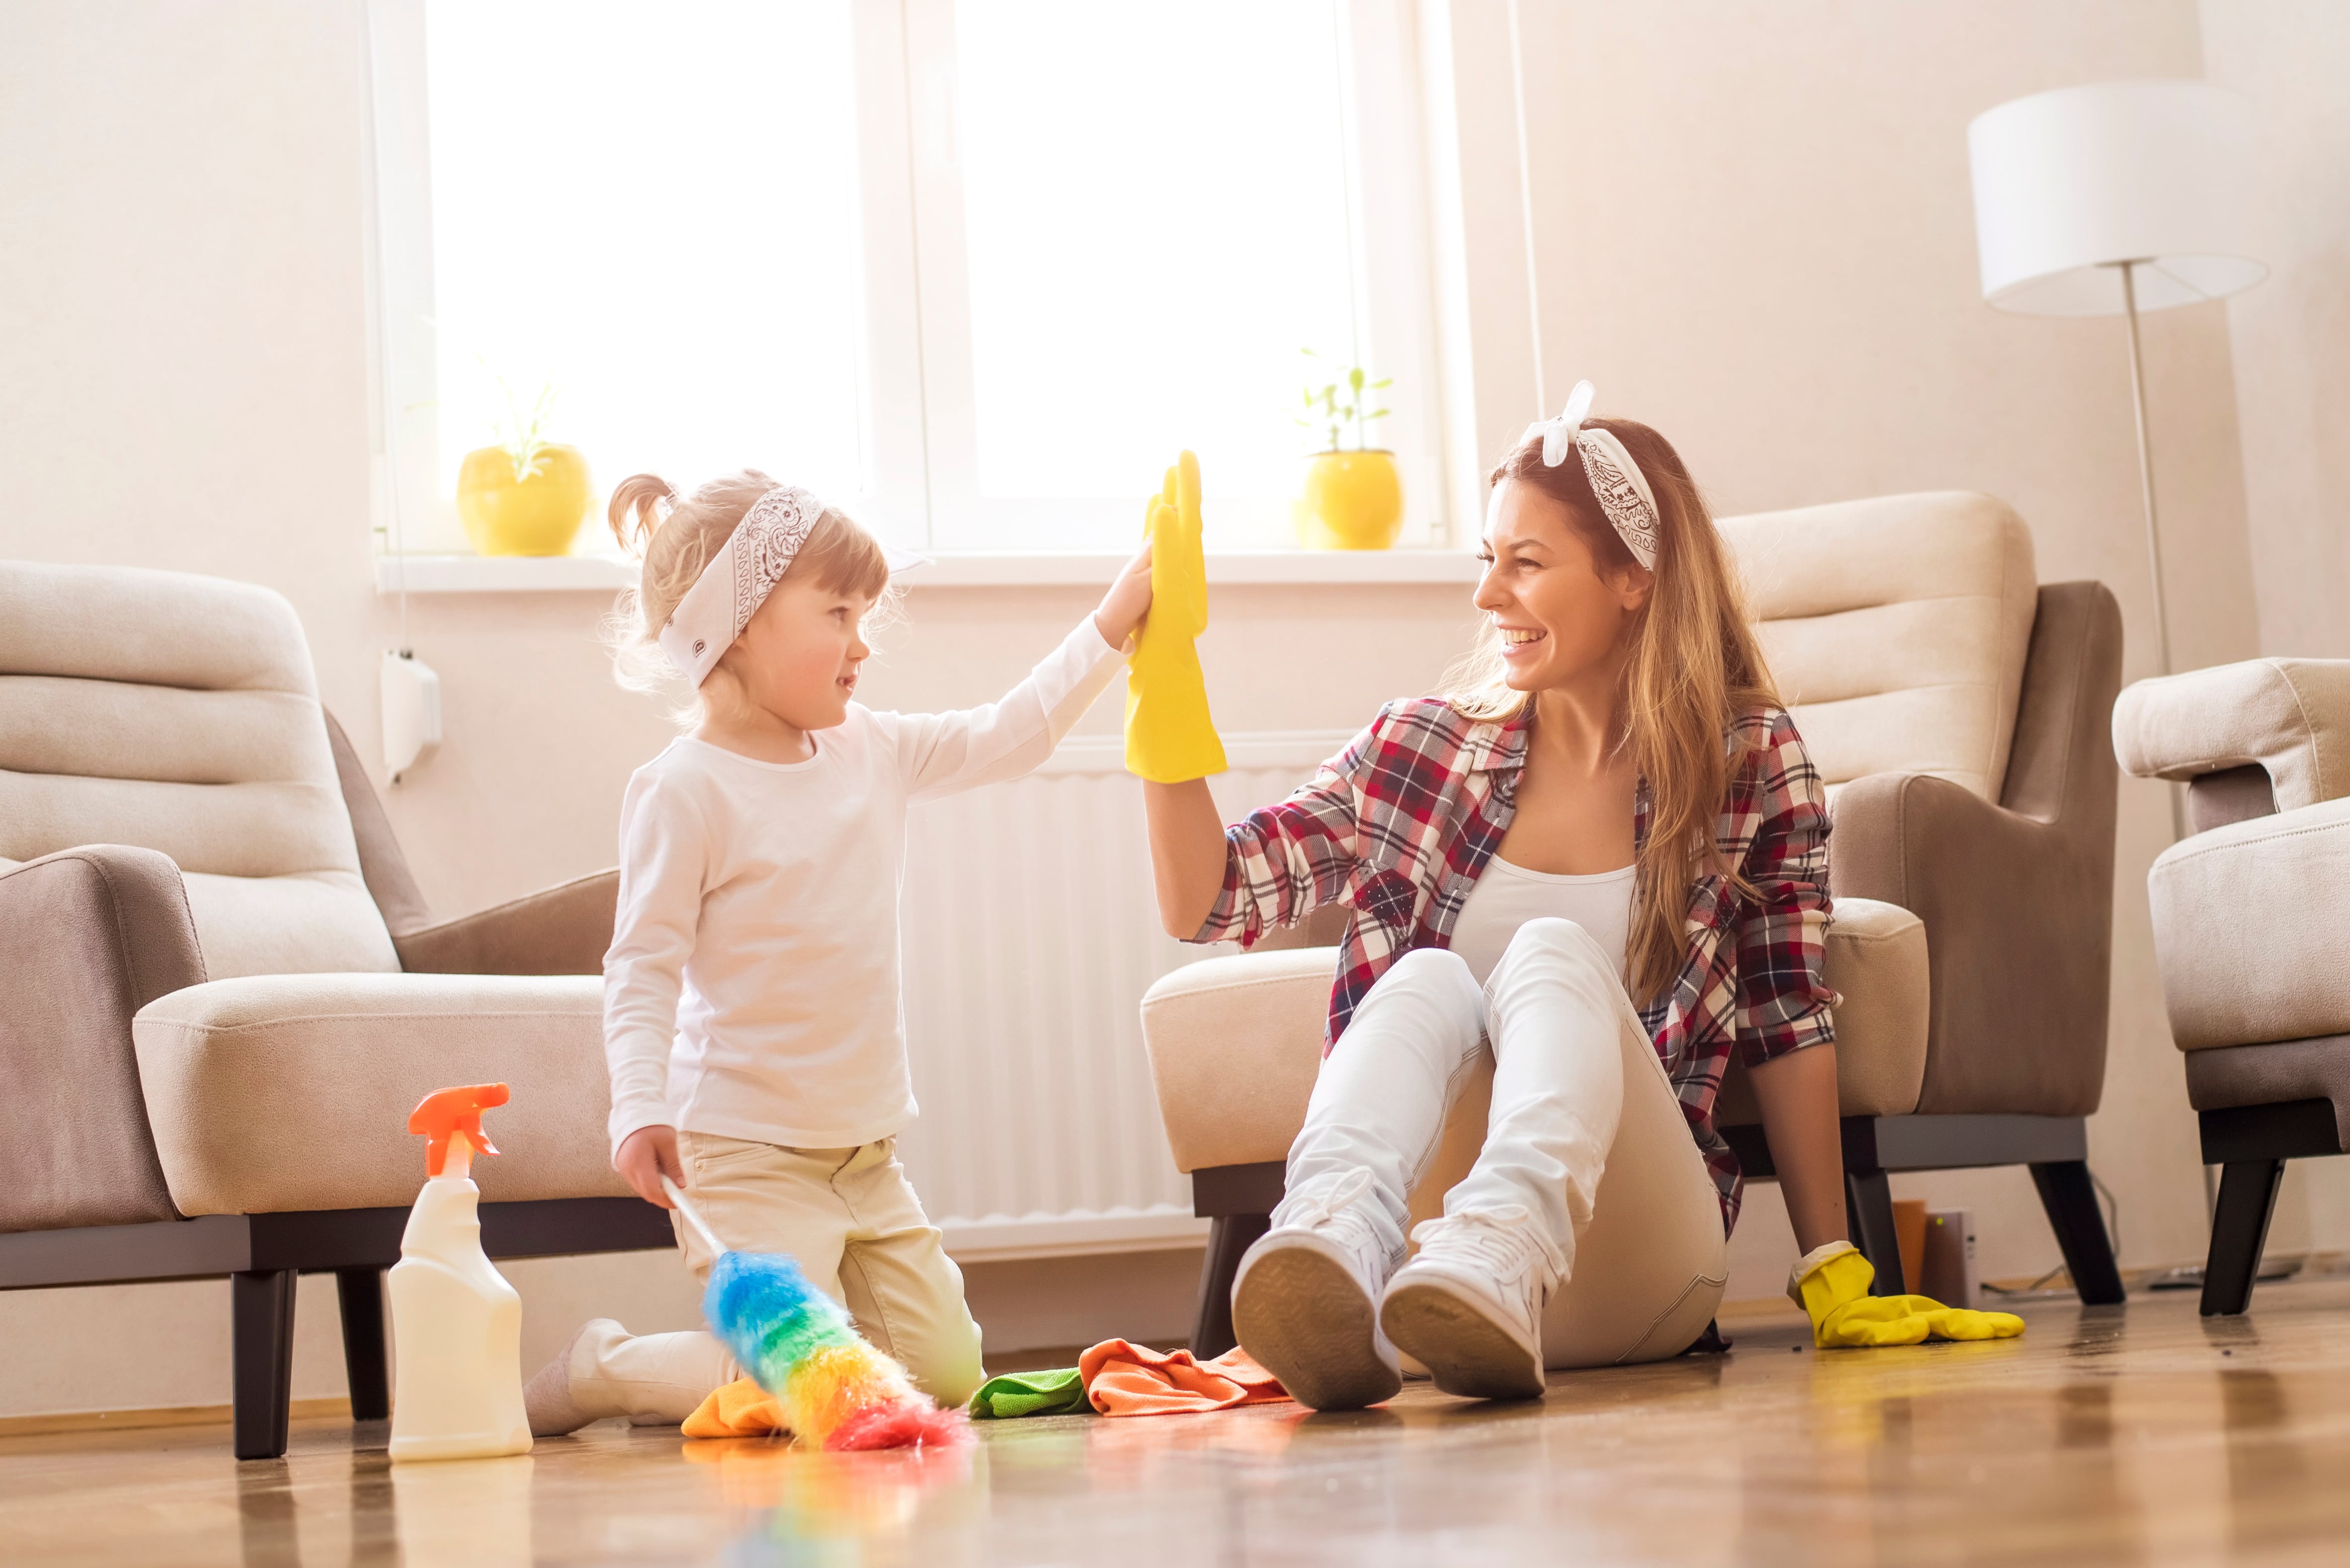 A mum and daughter high-fiving after a successful spring cleaning session. The mum is smiling enthusiastically and wearing marigolds, the daughter holds a multi-coloured feather duster in her other hand.